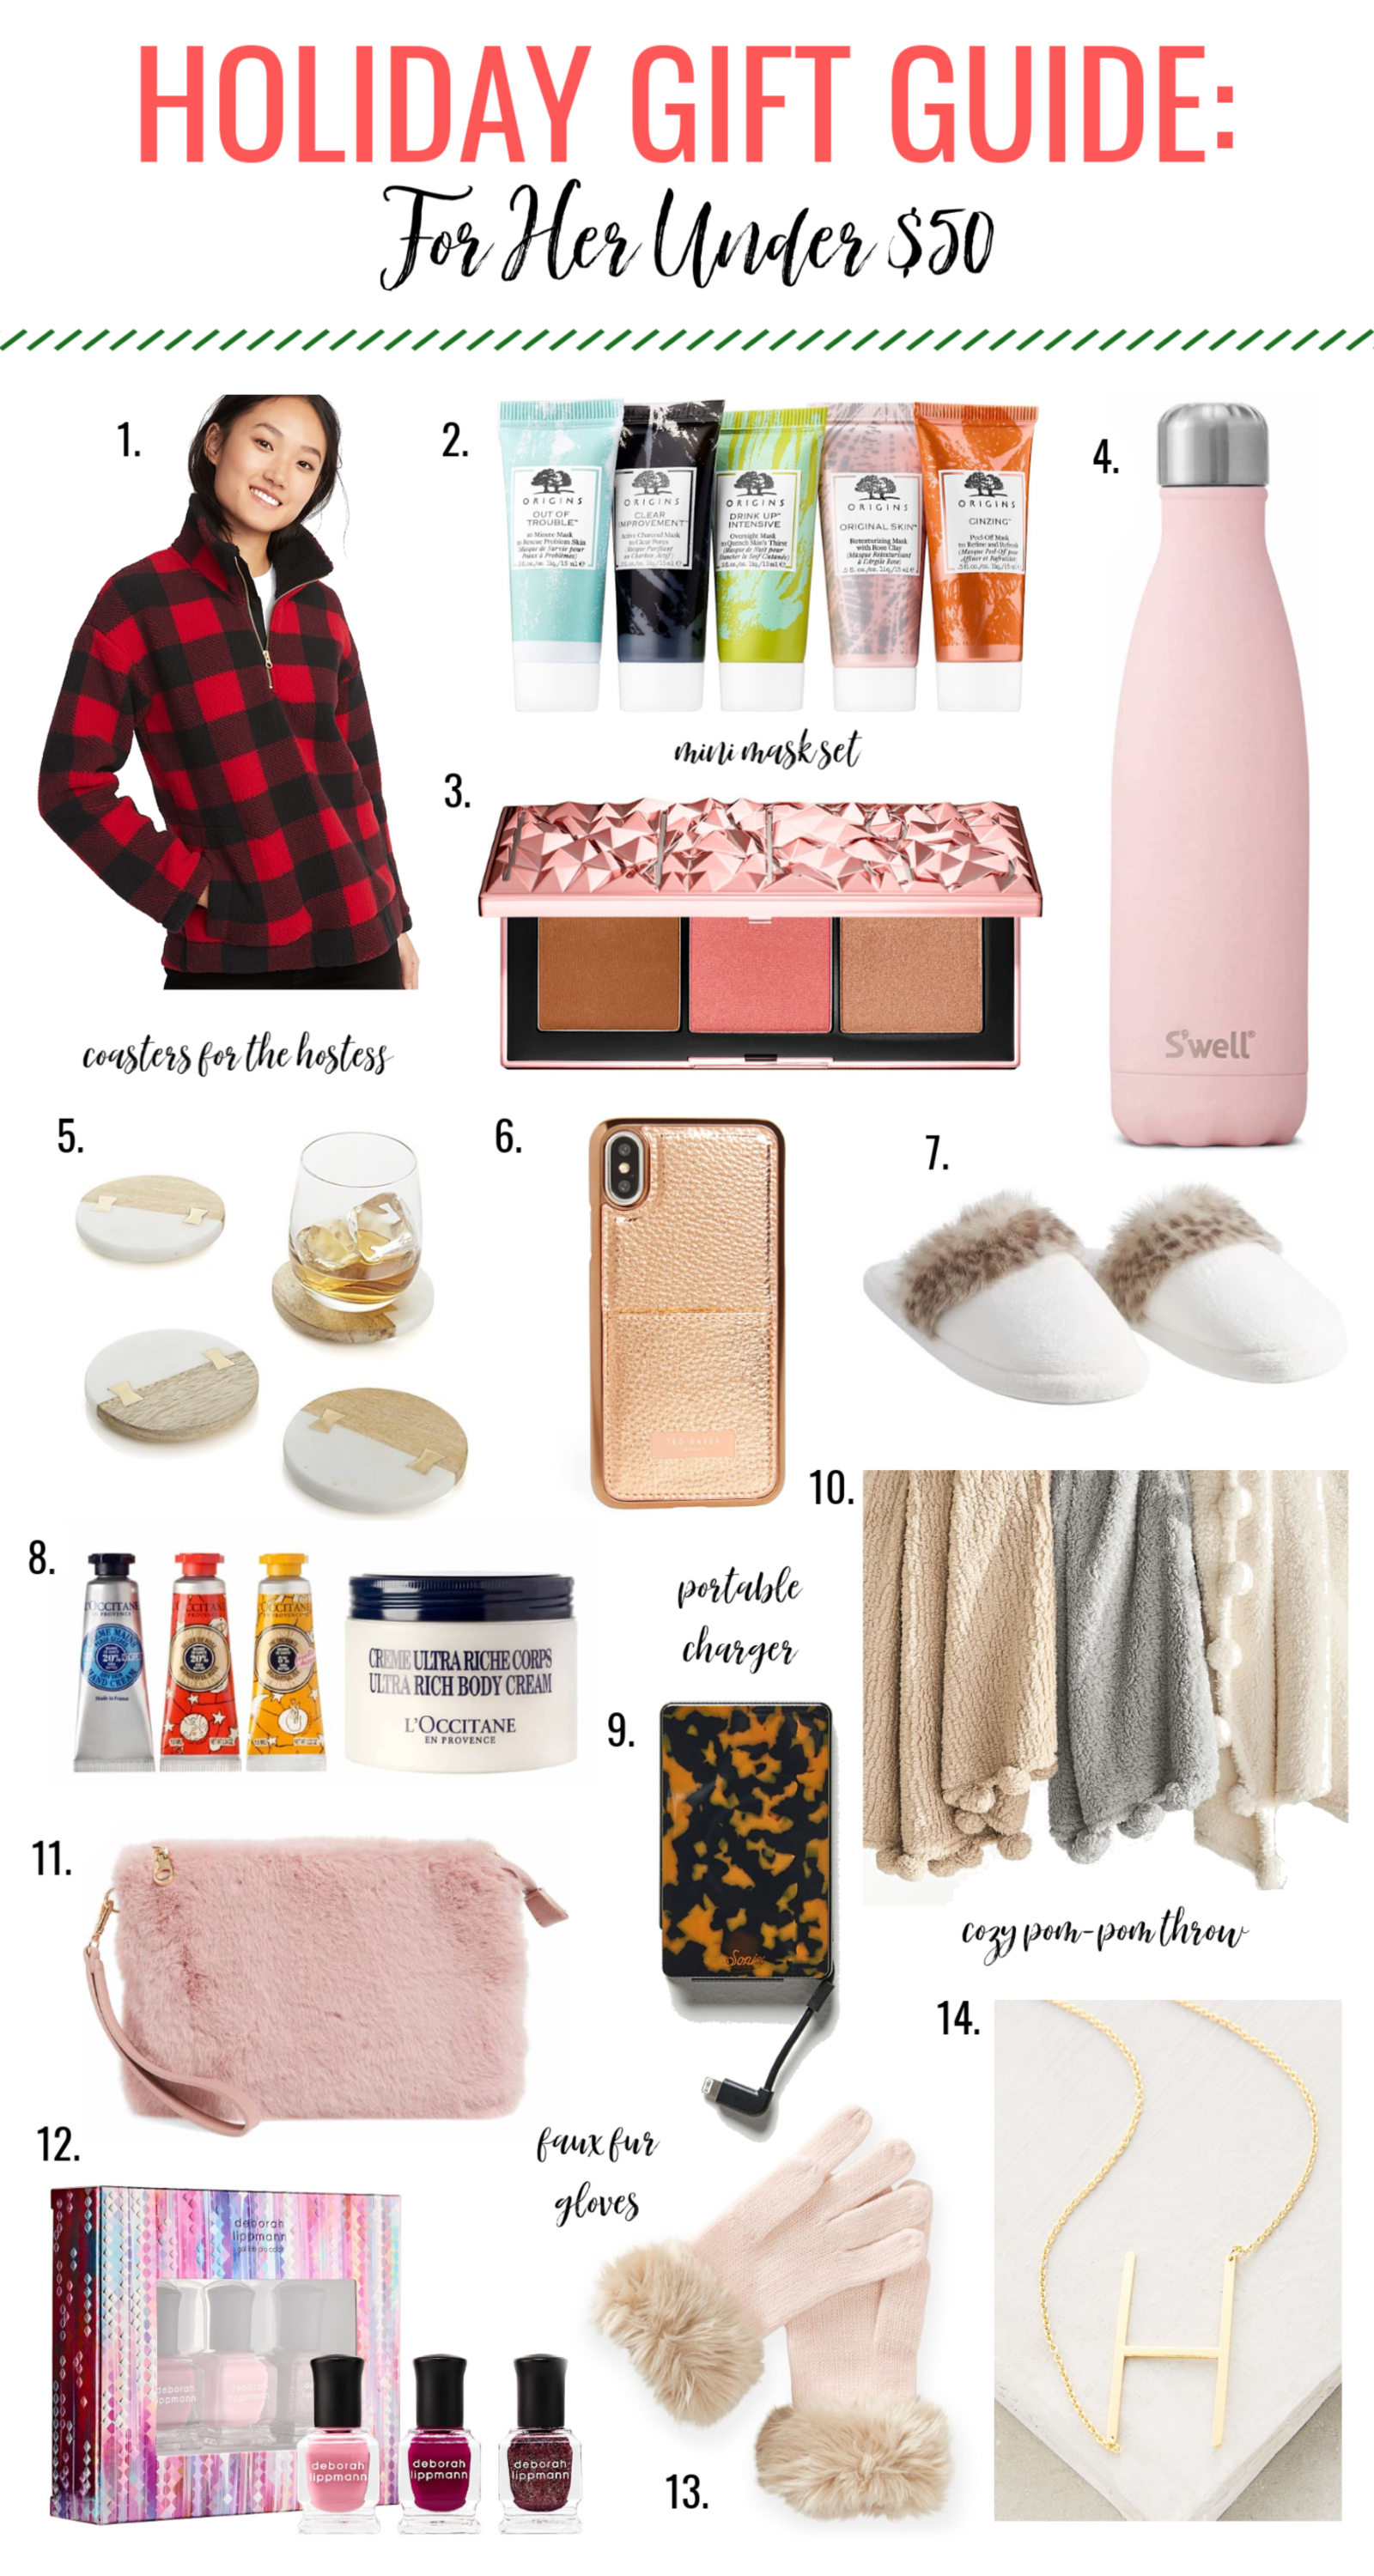 Gifts Under $50 for the woman in your life